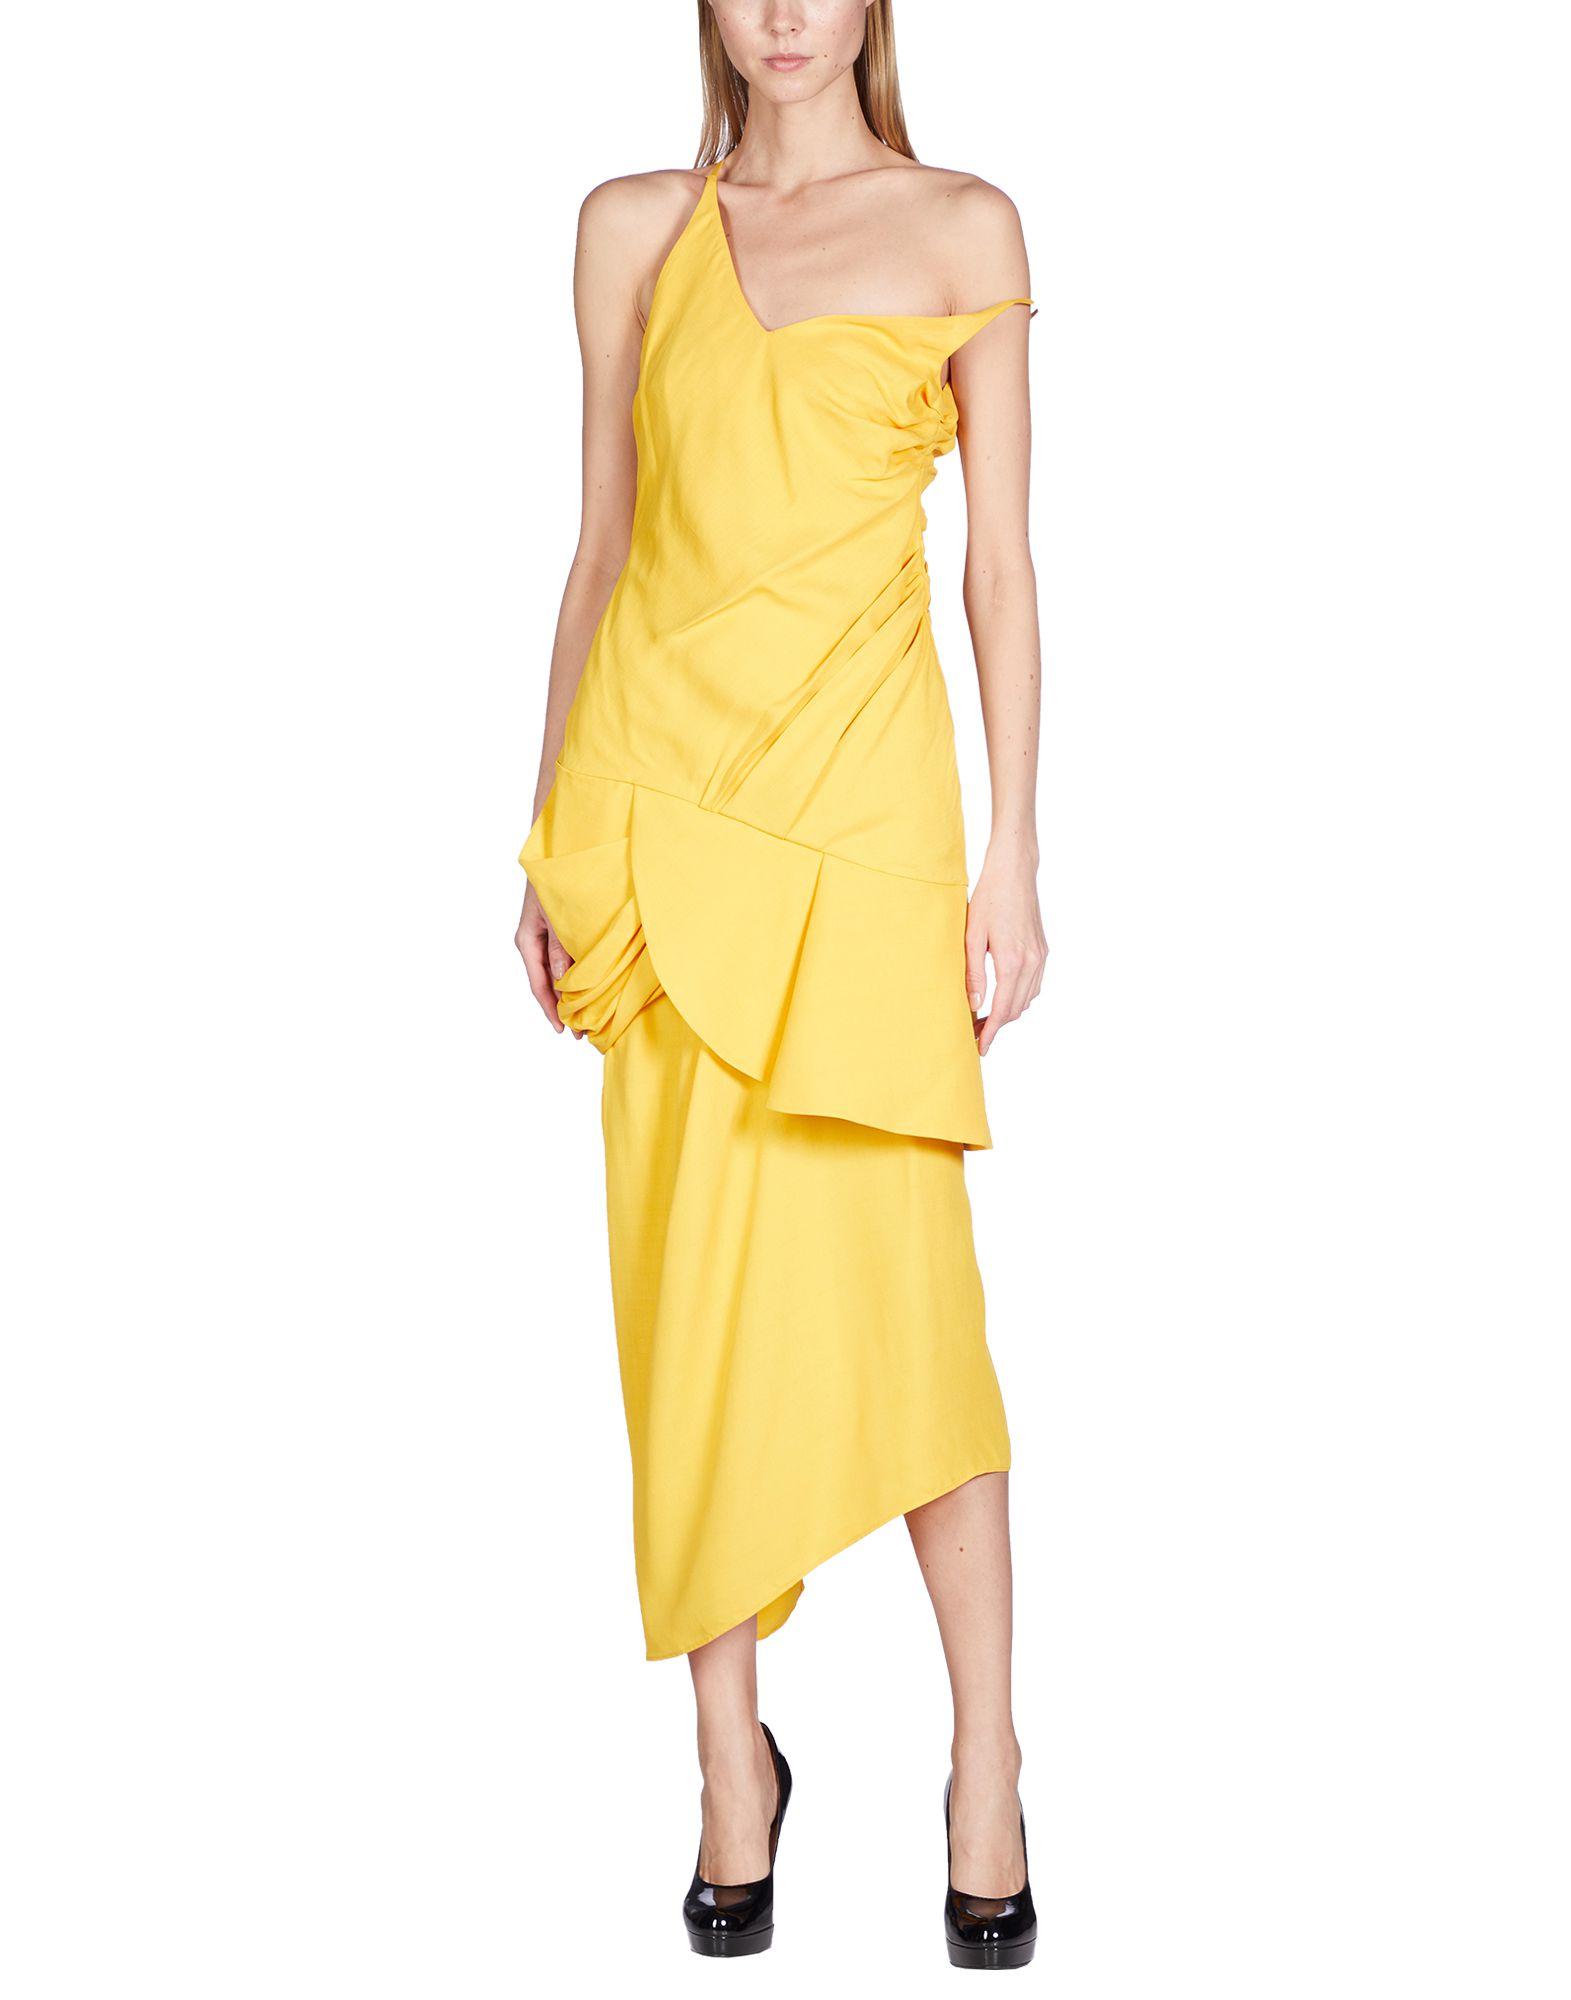 Jacquemus Synthetic 3/4 Length Dress in Yellow - Lyst